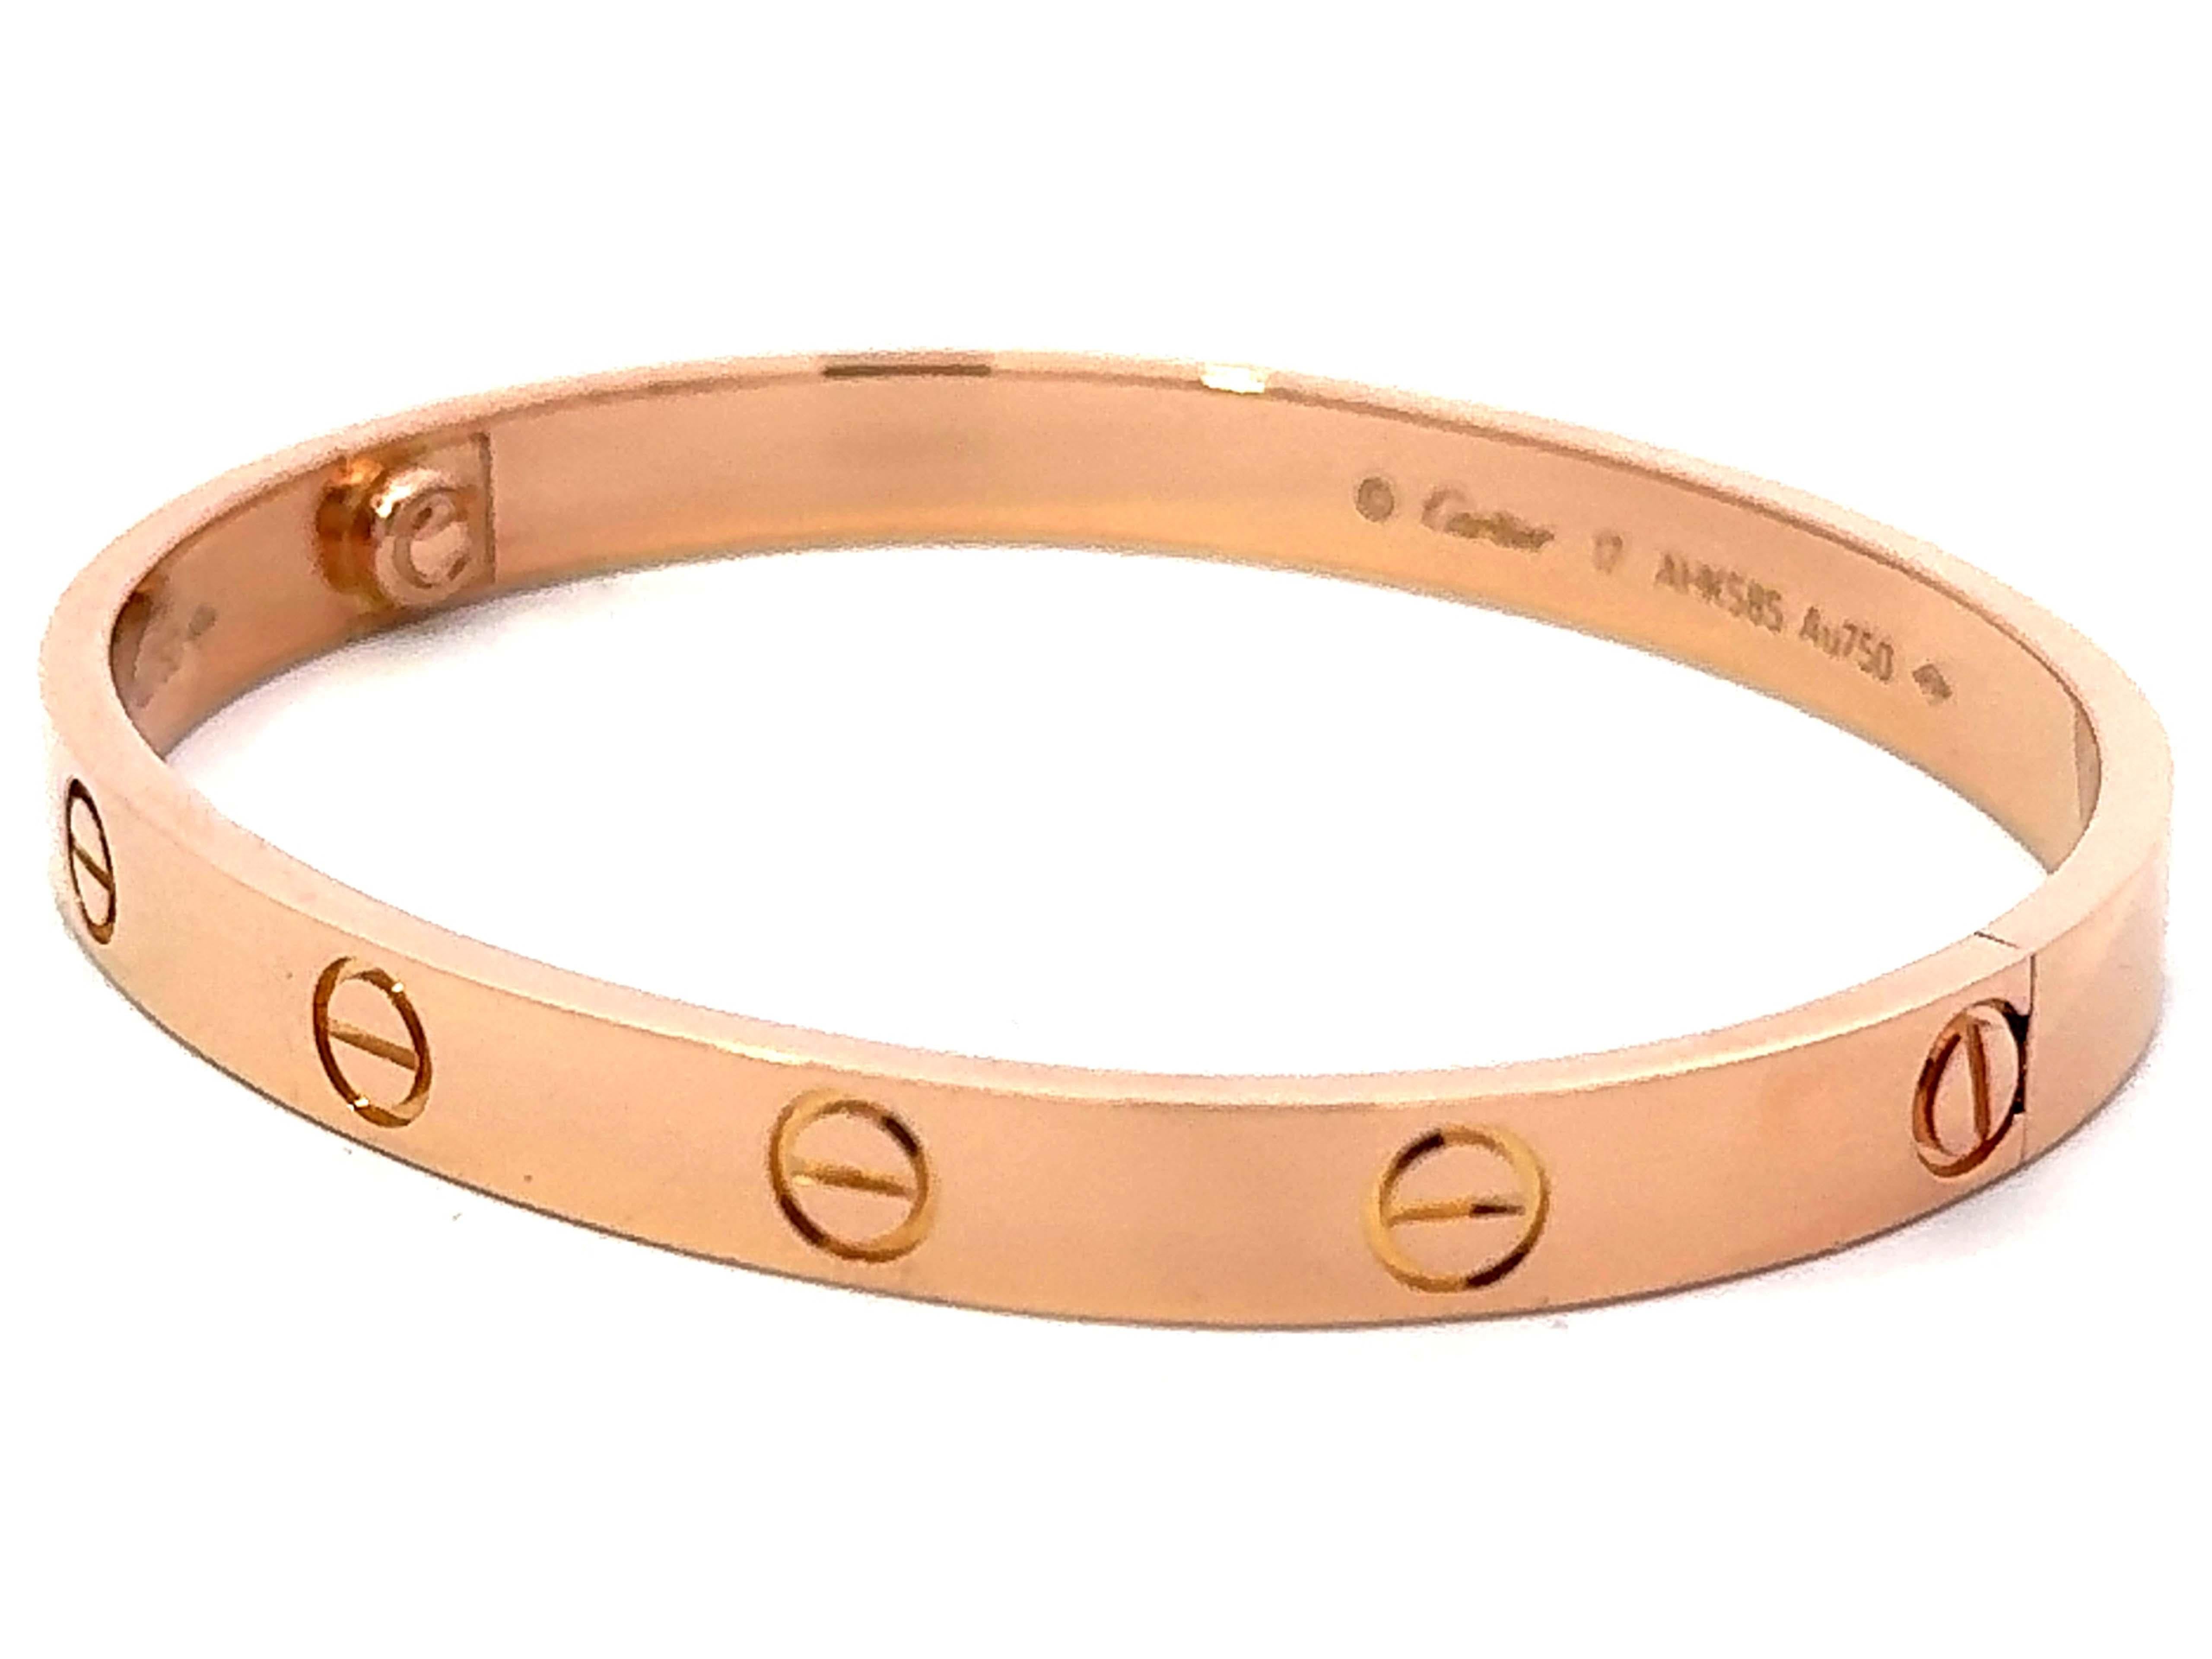 Cartier Love Bracelet in 18K Rose Gold Size 17 With Box and Papers For Sale 4